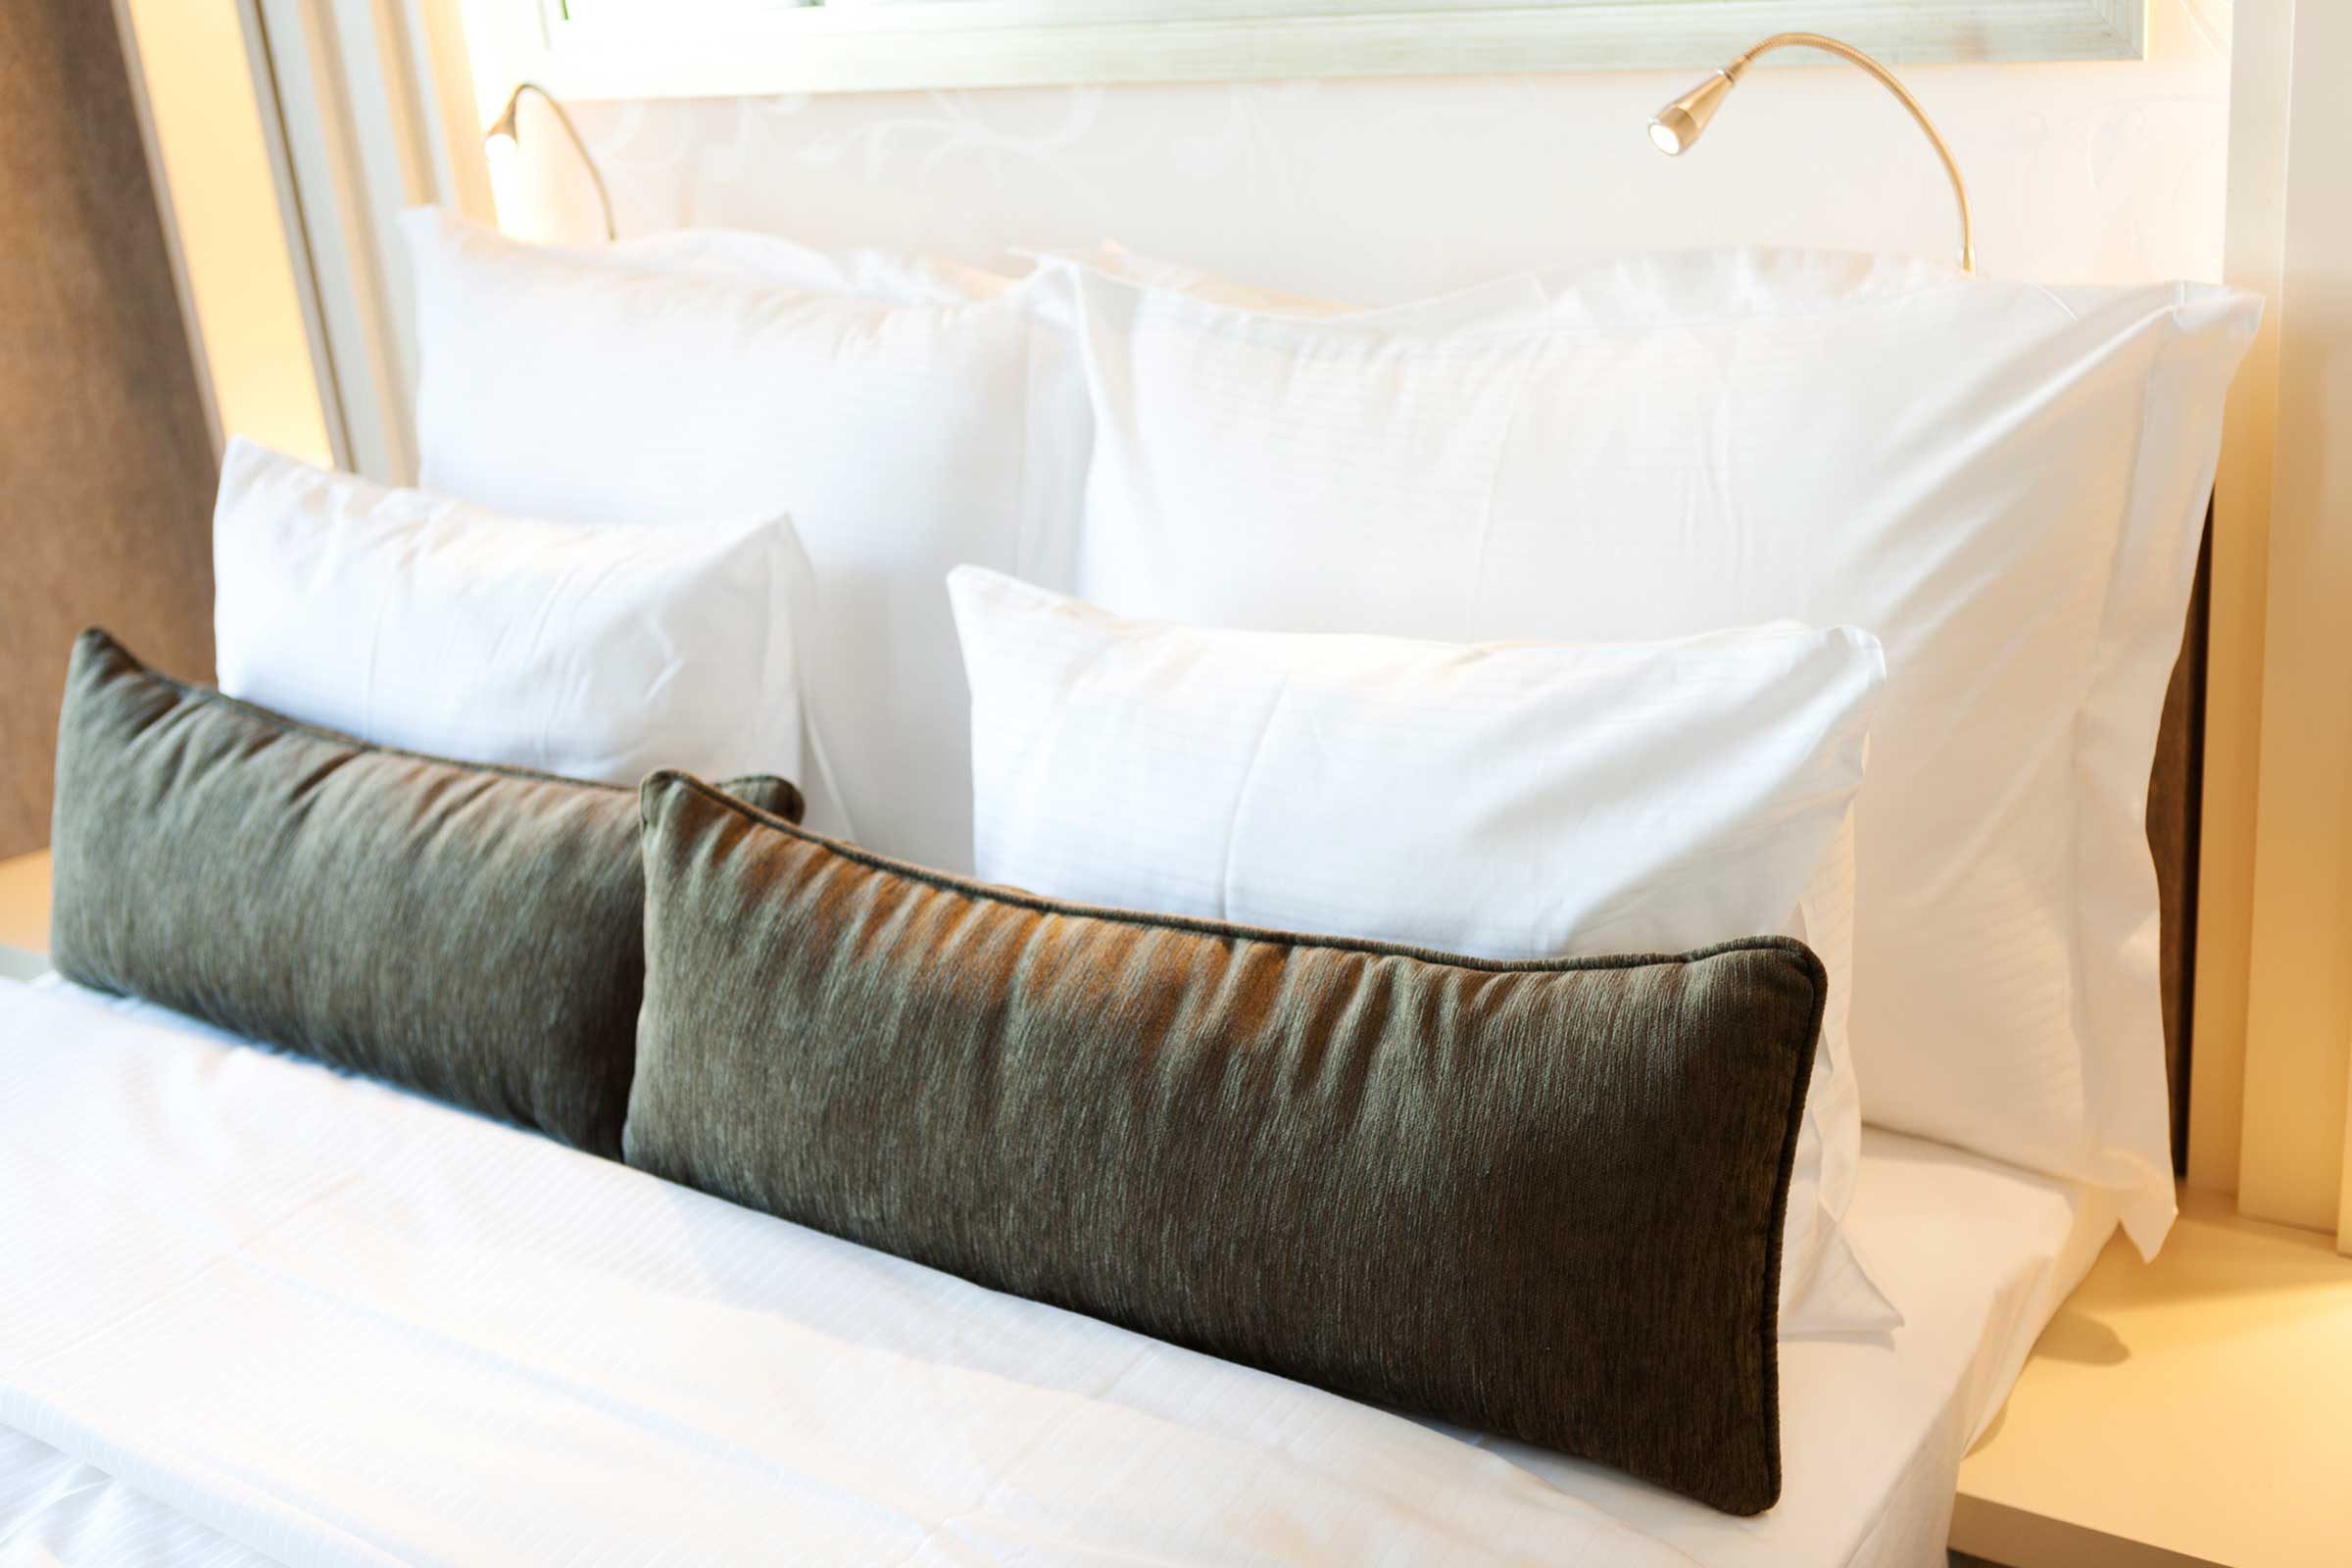 Fluffy Hotel Pillows: How to Get Them 